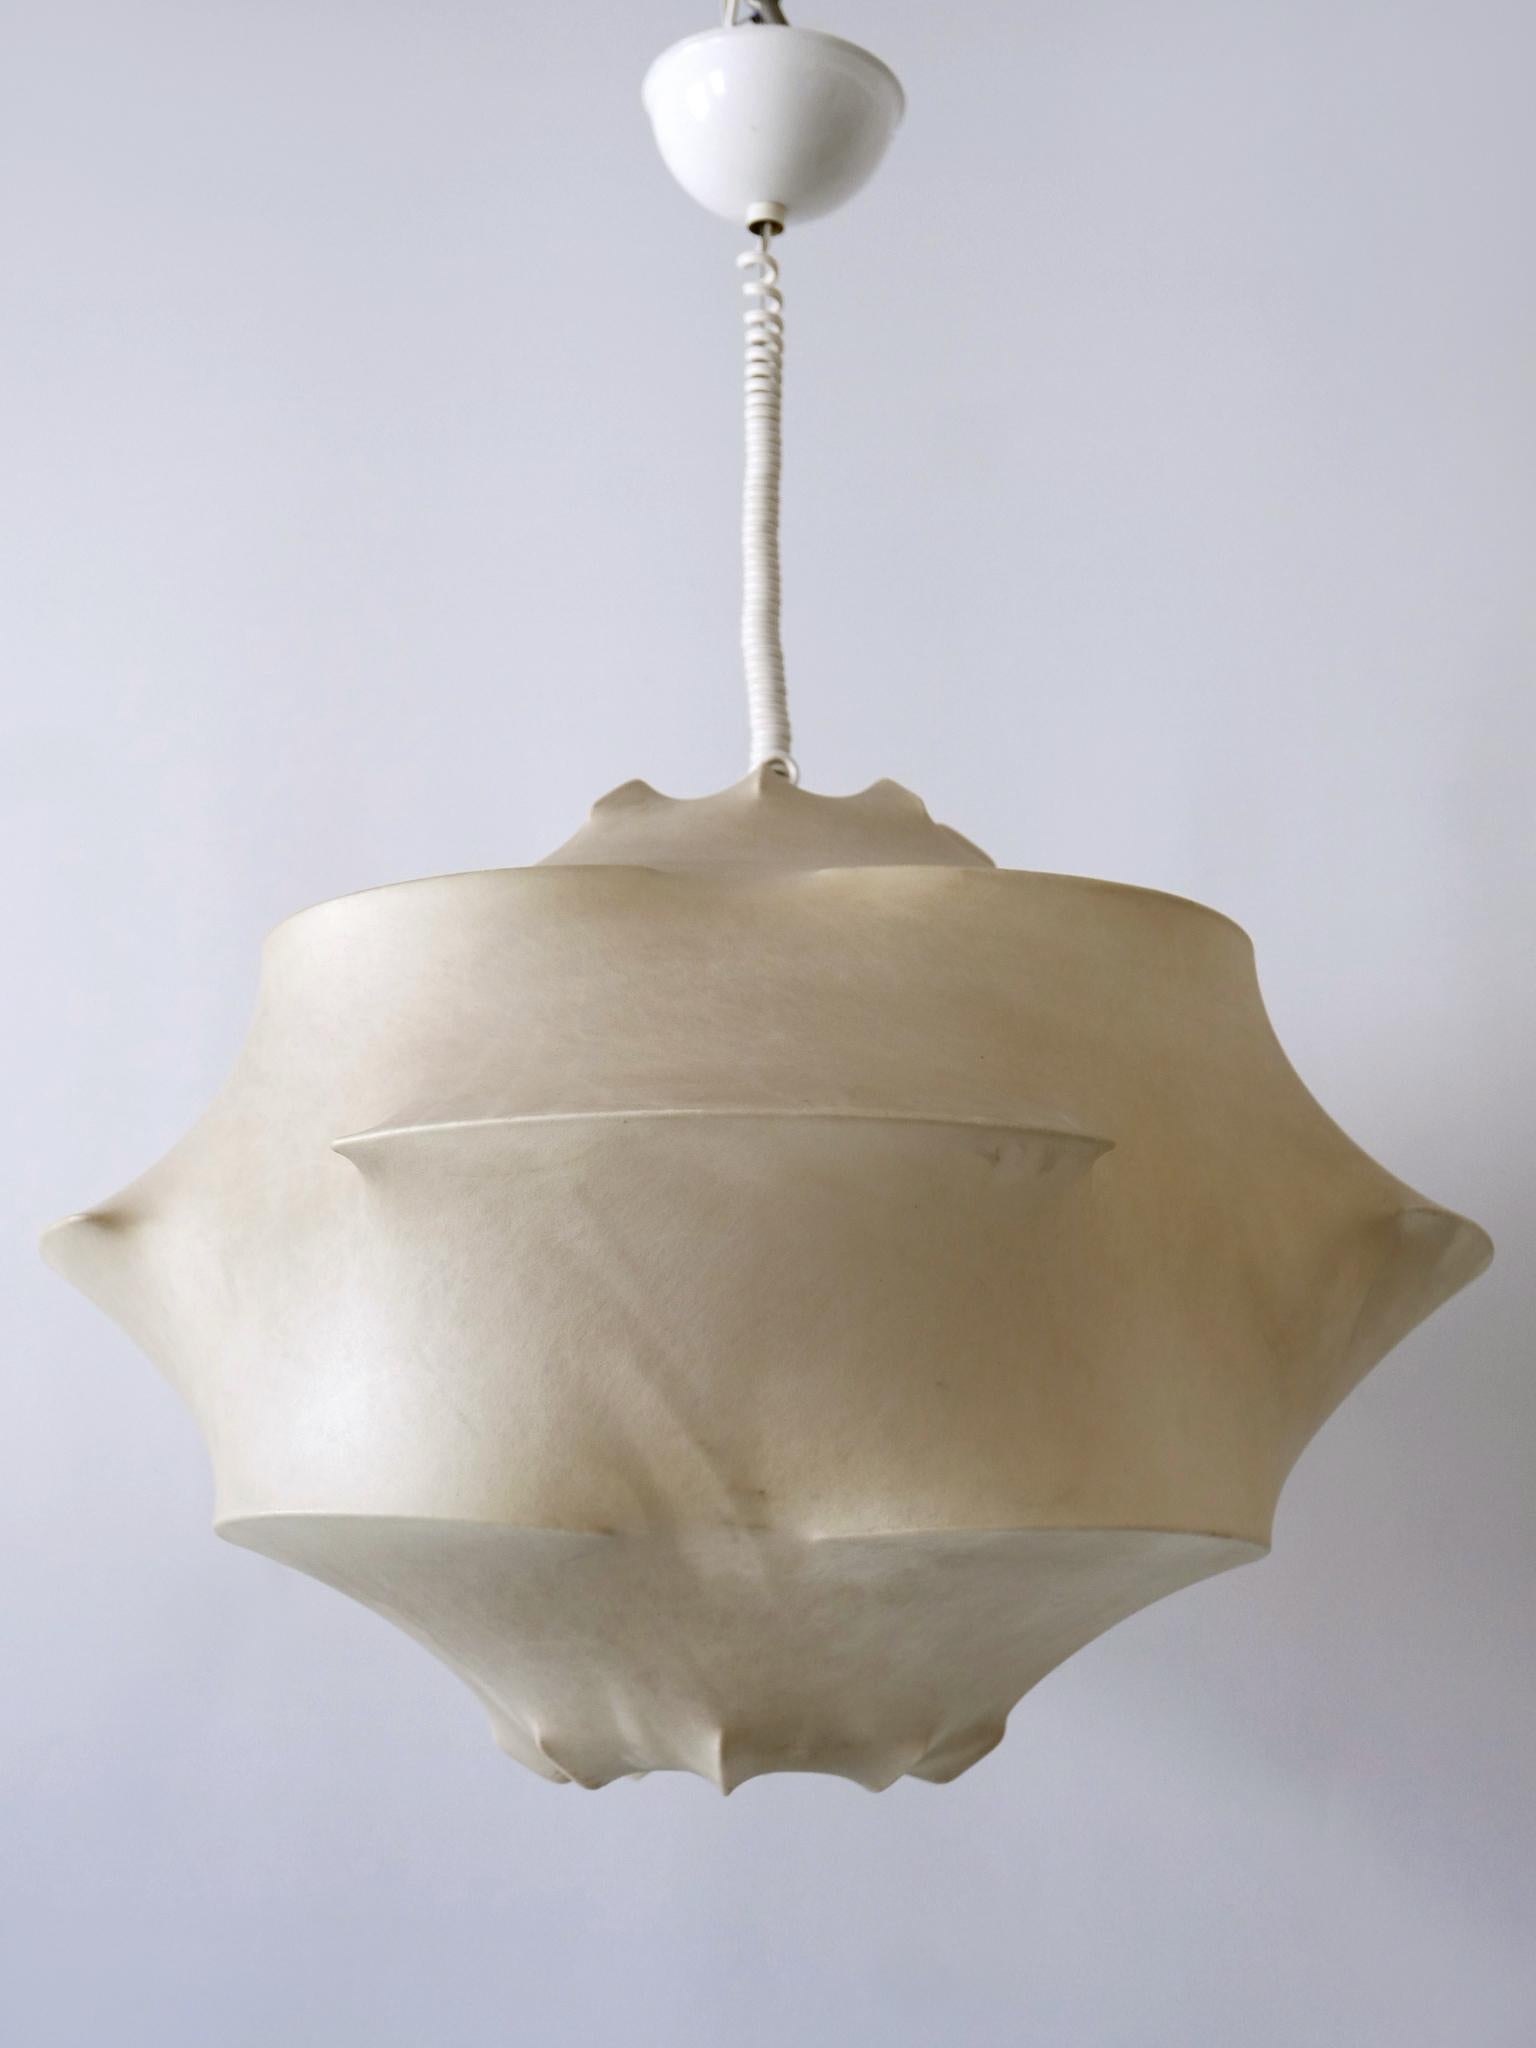 XL Mid-Century Modern Cocoon Pendant Lamp or Hanging Light by Flos Italy, 1960s For Sale 6